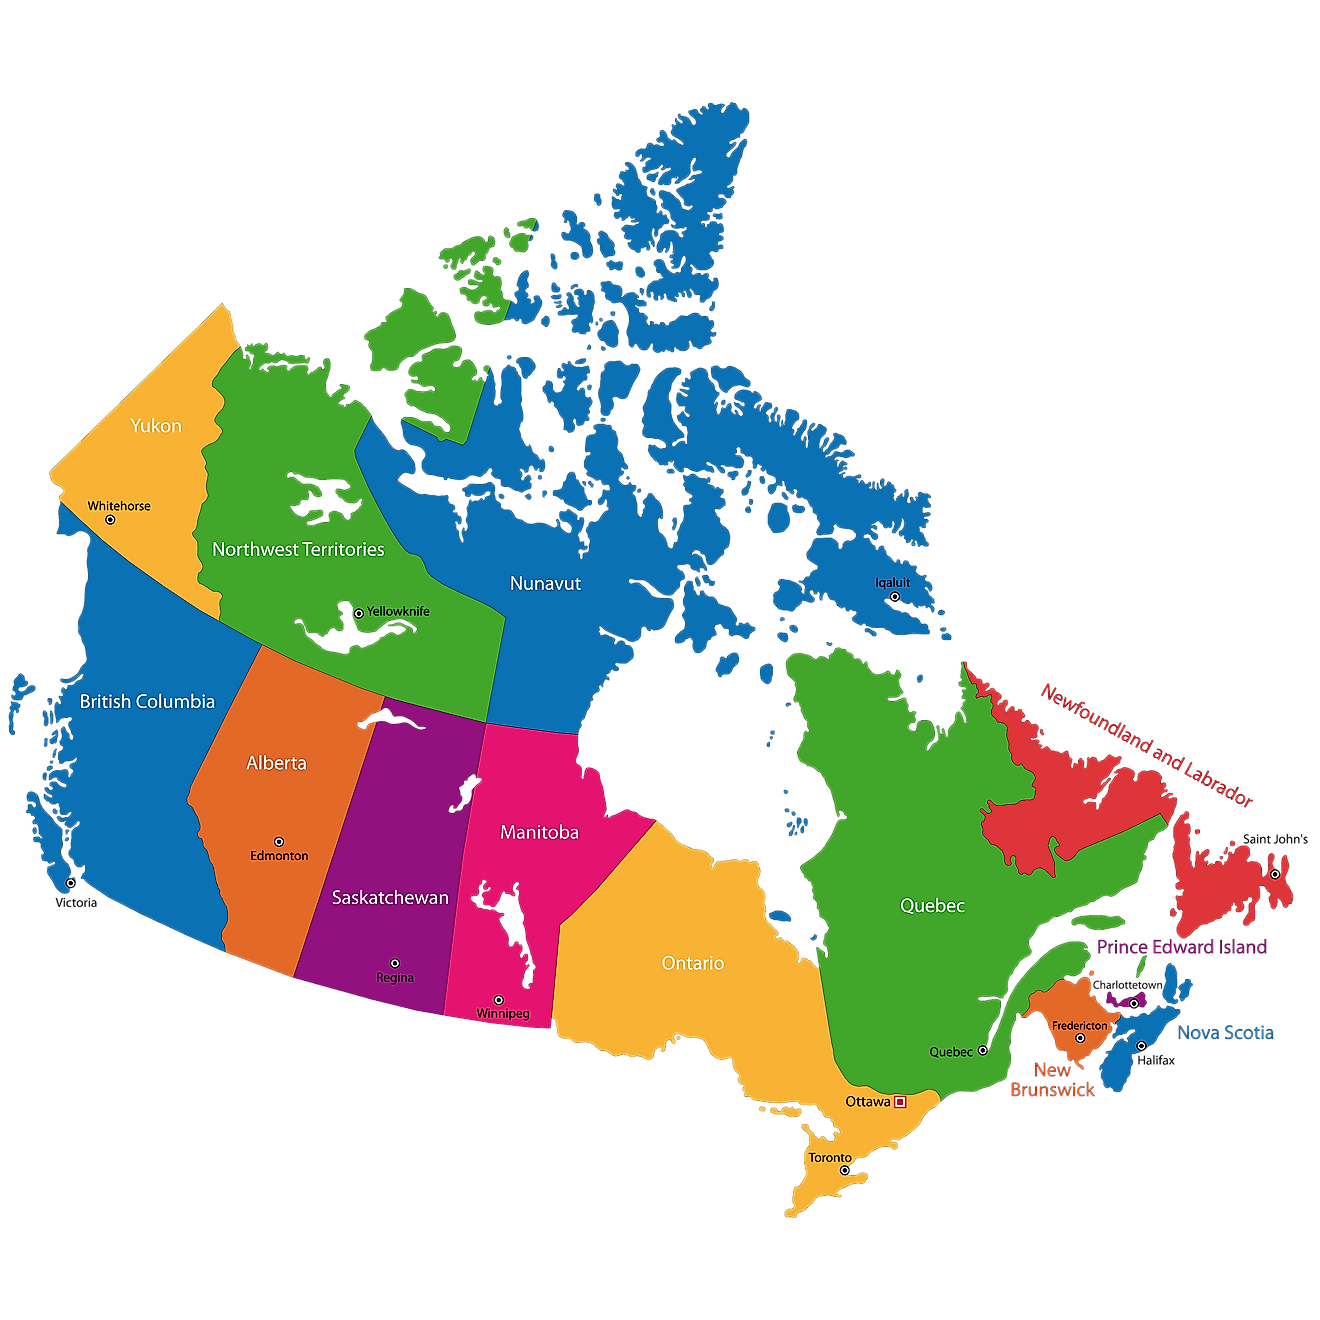 Canada's political map showing provinces/territories and their capital cities.